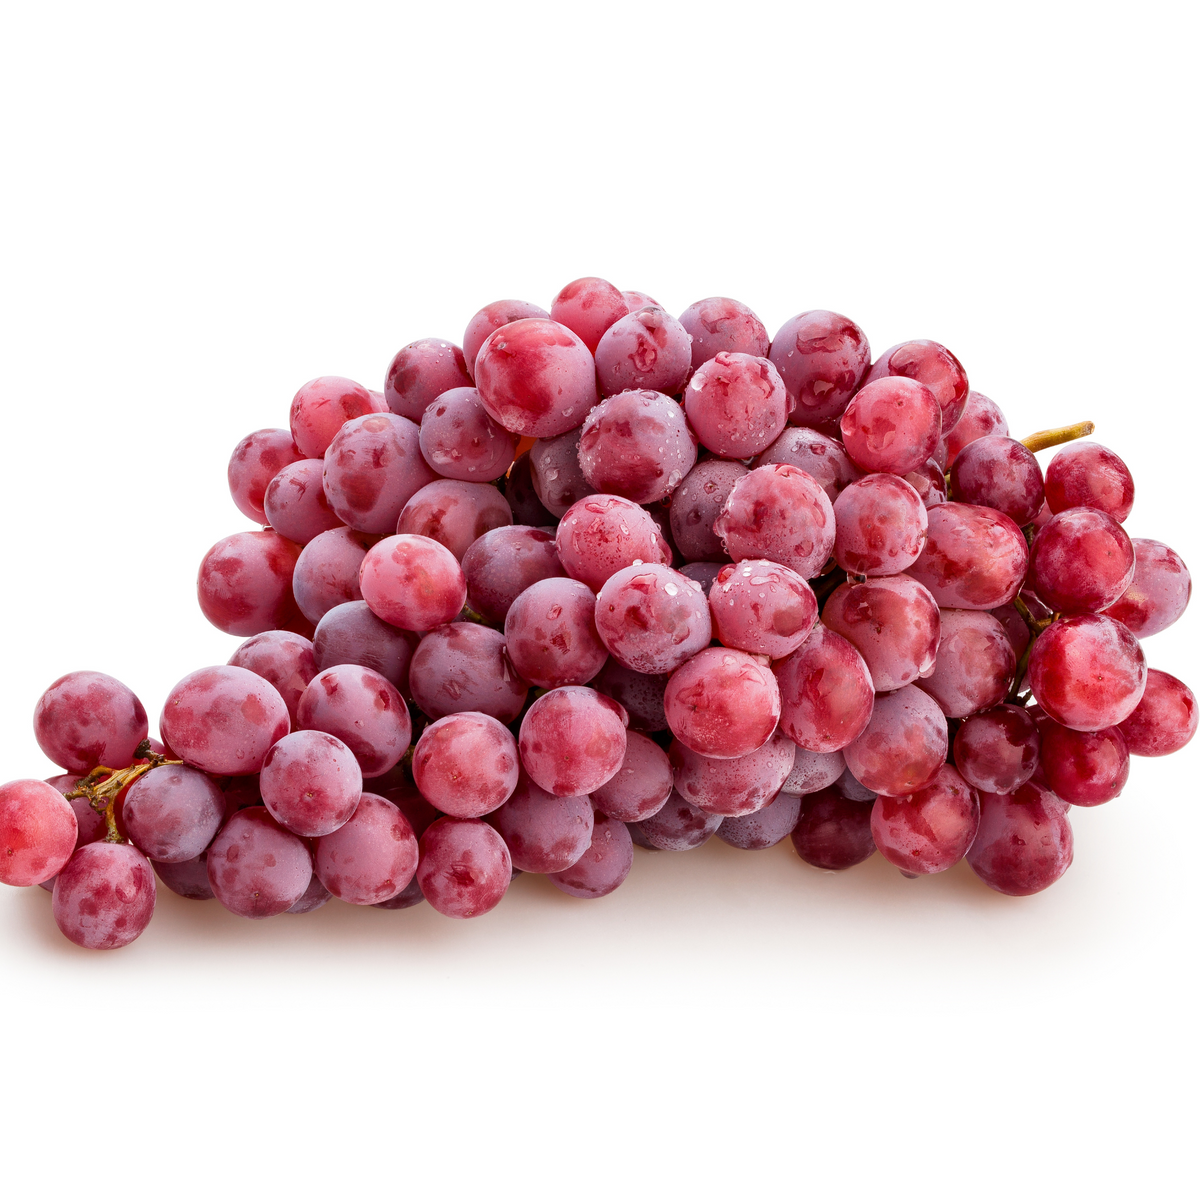 Seeded Red Grapes